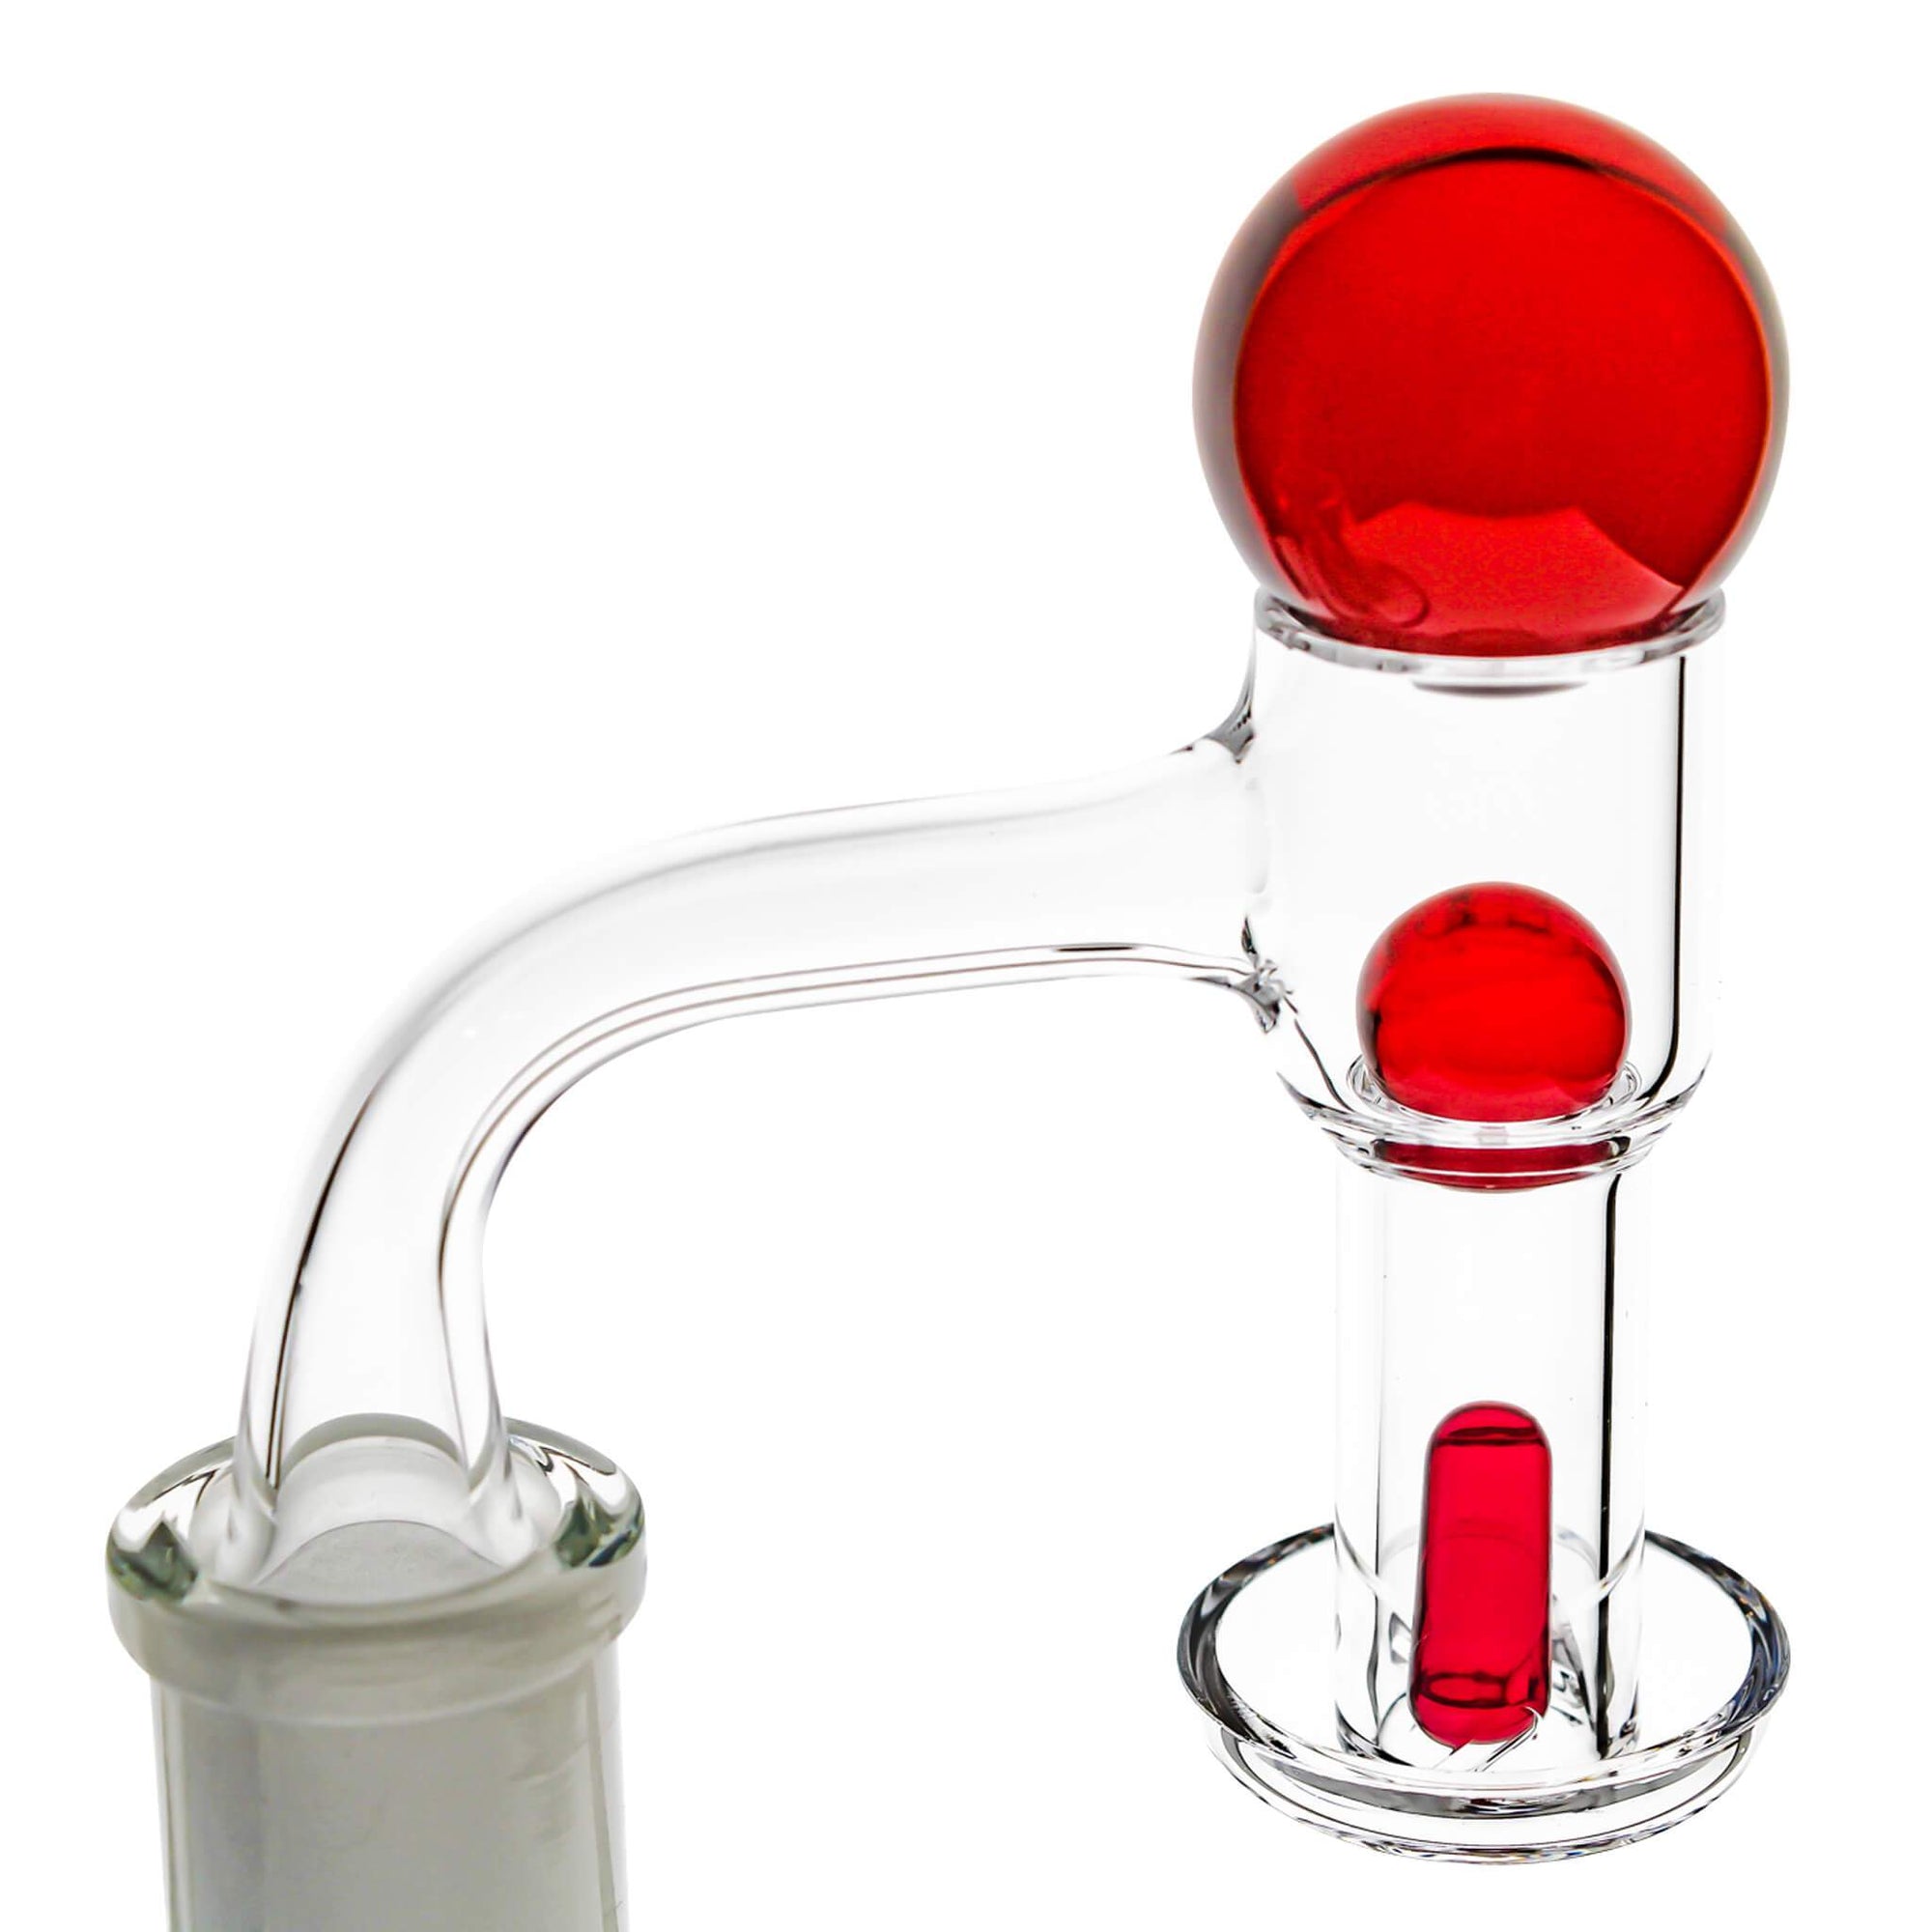 Full Weld Terp Slurper Tall VacTube Banger Kit | Full Ruby Stack View | the dabbing specialists